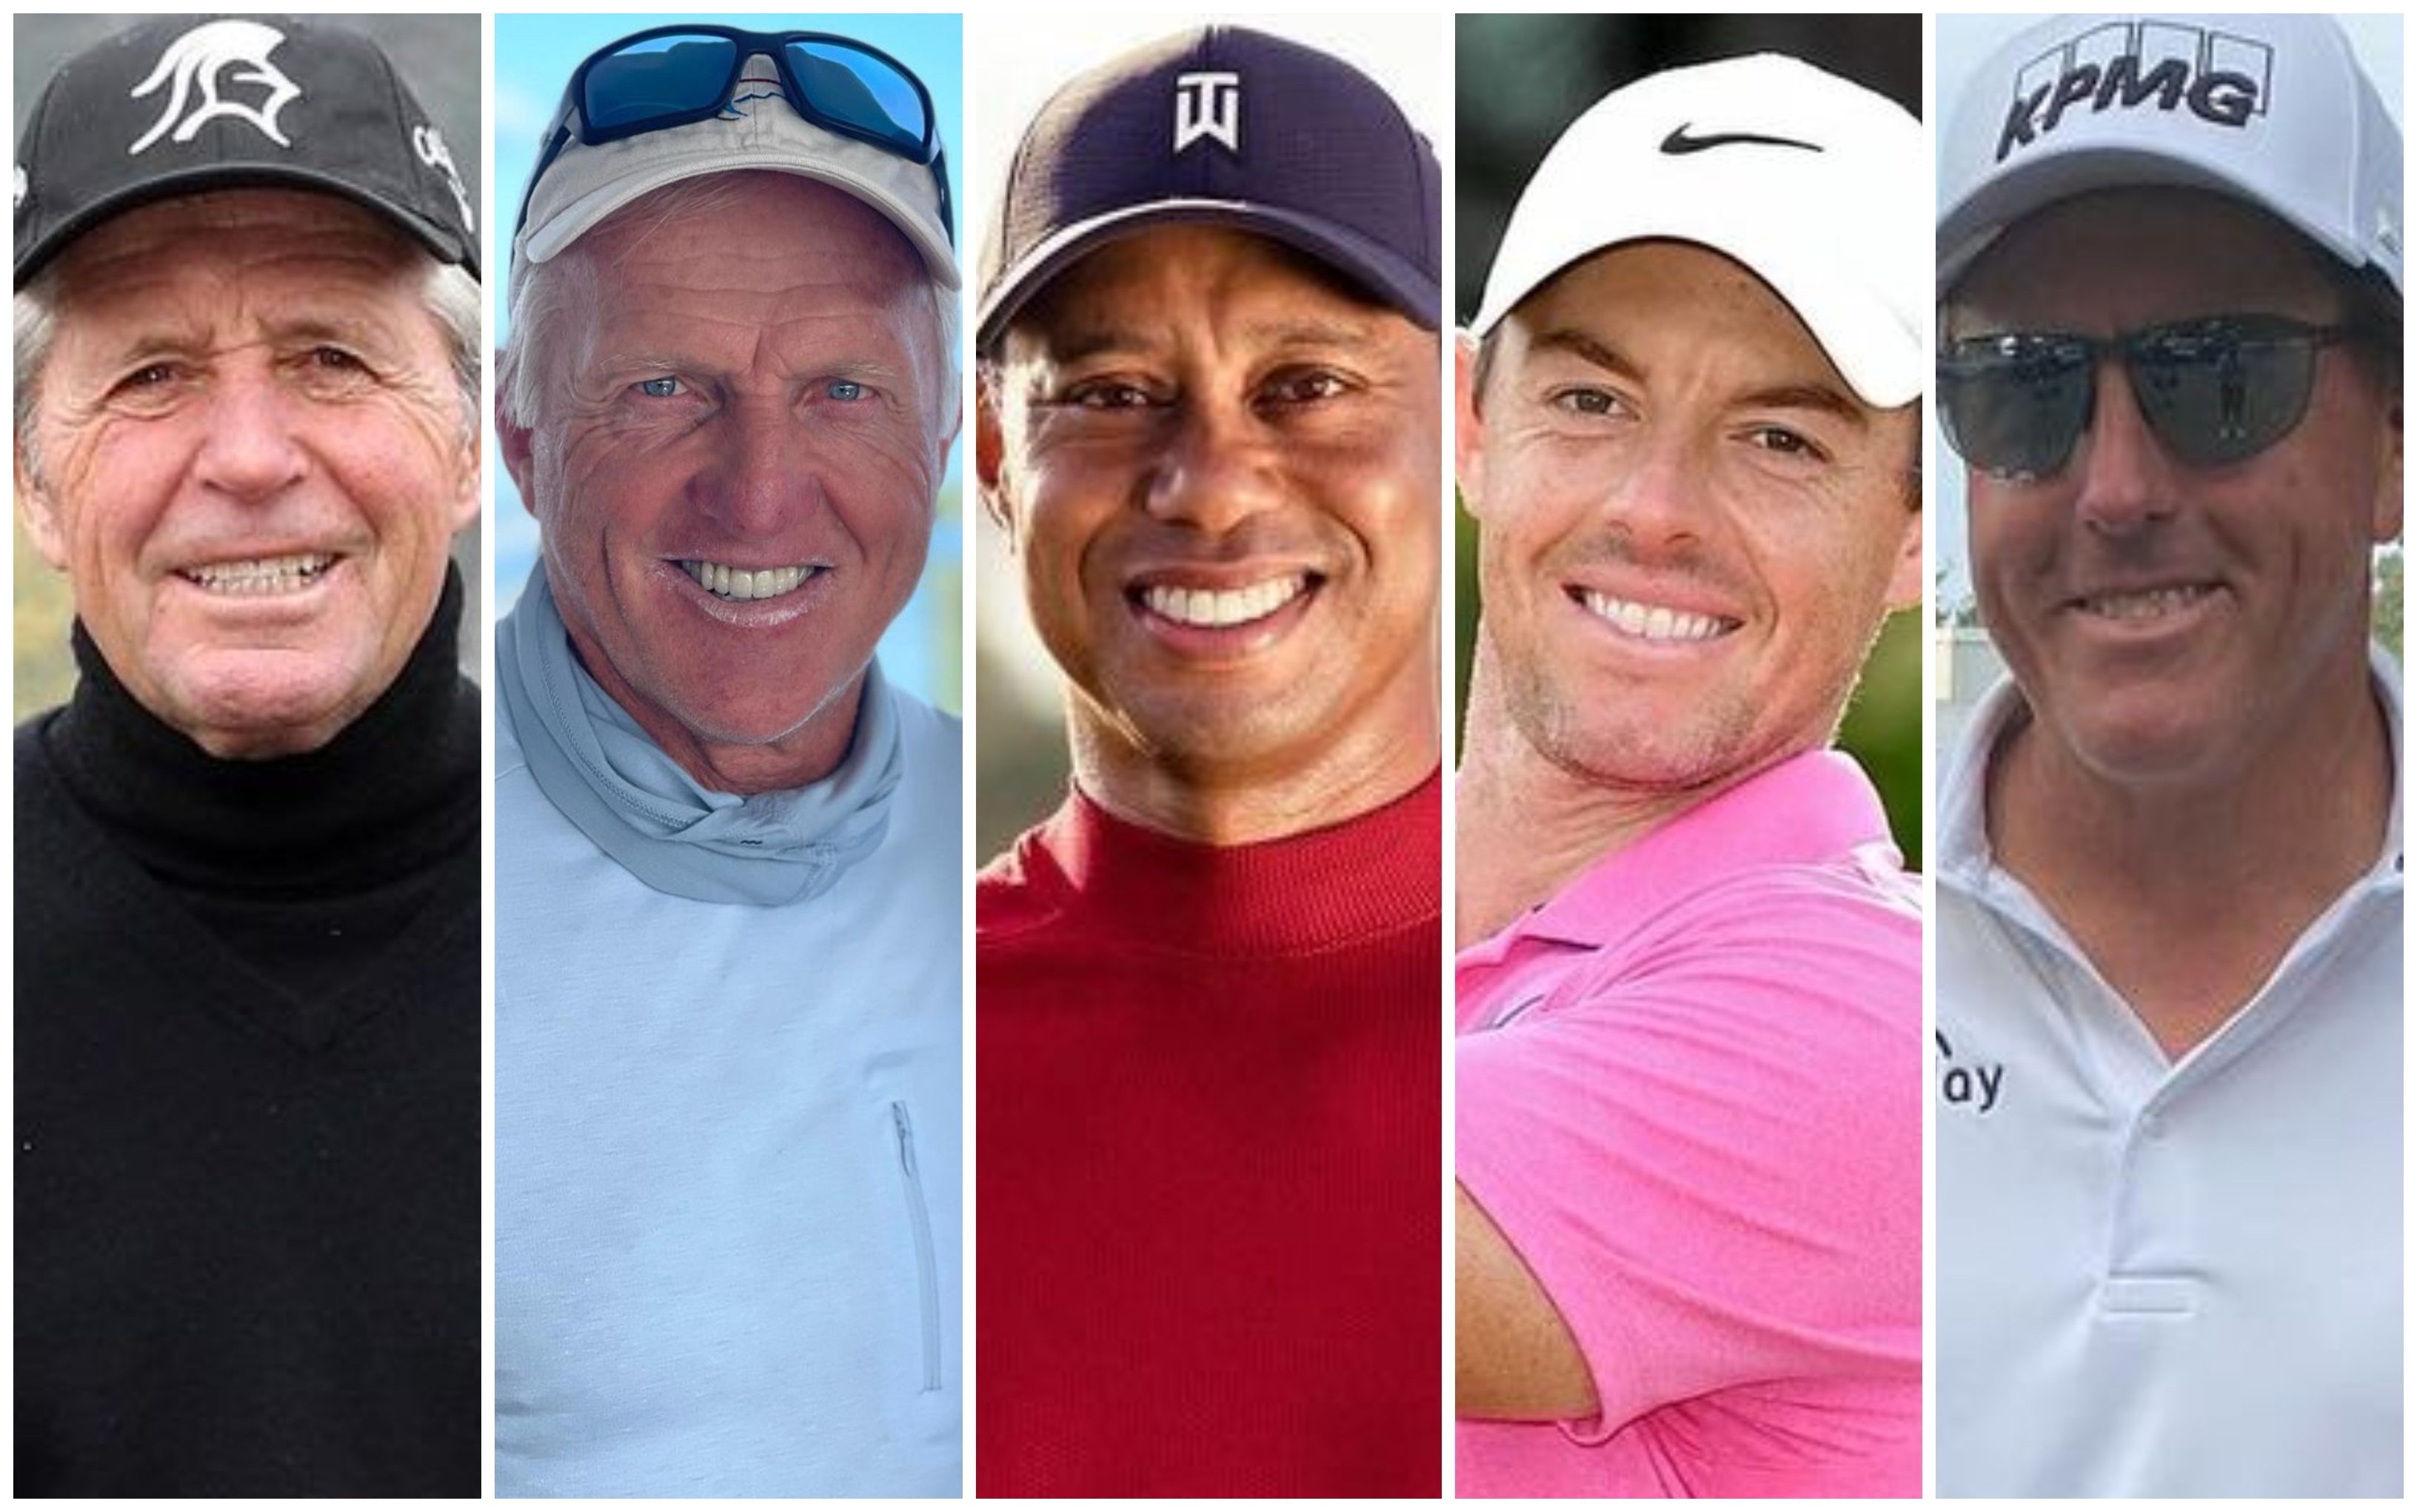 Gary Player, Greg Norman, Tiger Woods, Rory McIlory and Phil Mickelson are some of the richest golf stars of 2022. Photos: @gary.player, @shark_gregnorman, @tigerwoods, @rorymcilroy, @philmickelson/Instagram